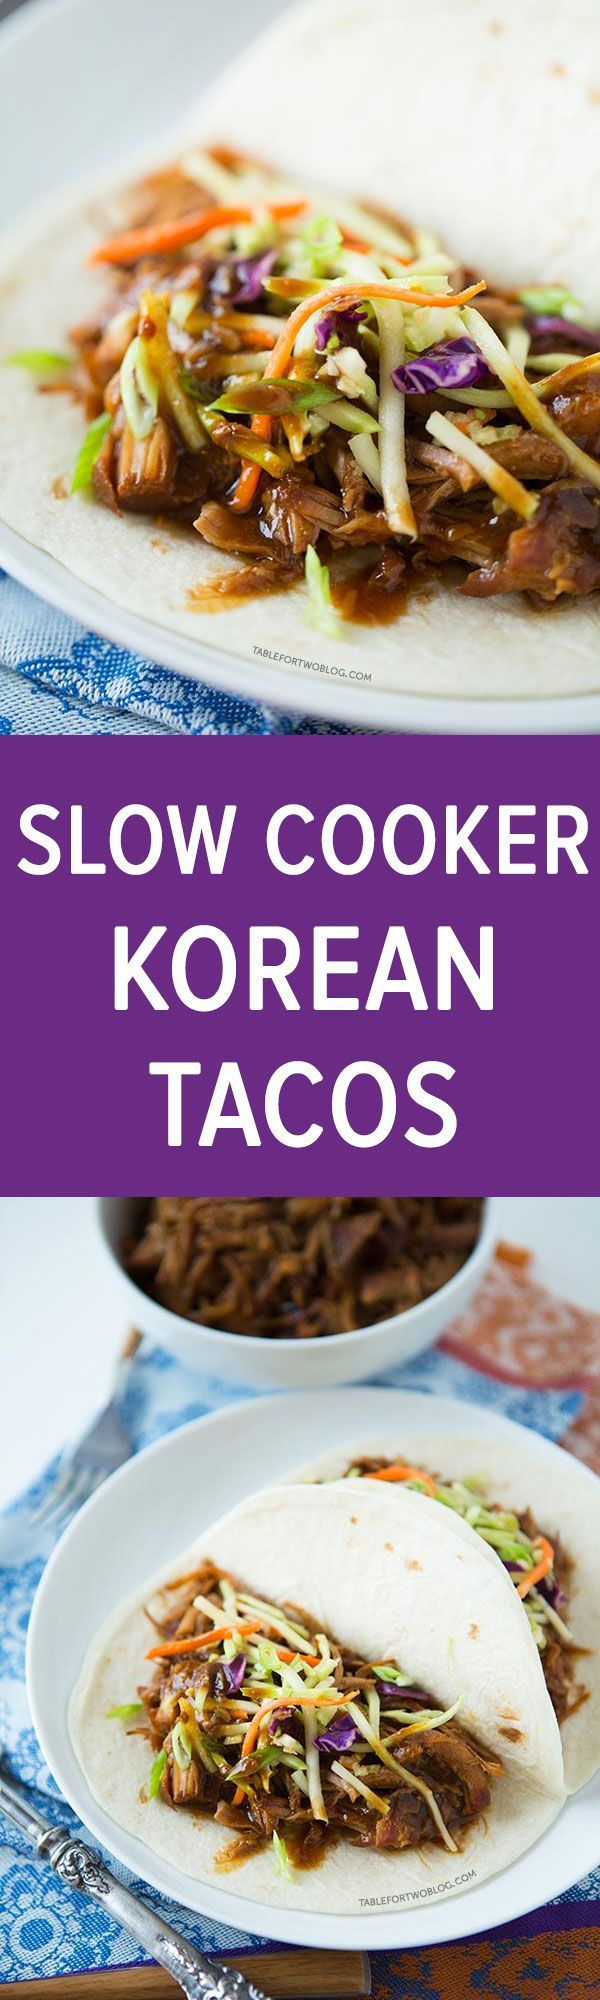 Slow cooker Korean tacos are so easy to make and the results are a tender & flavorful pork wrapped inside a warm tortilla and